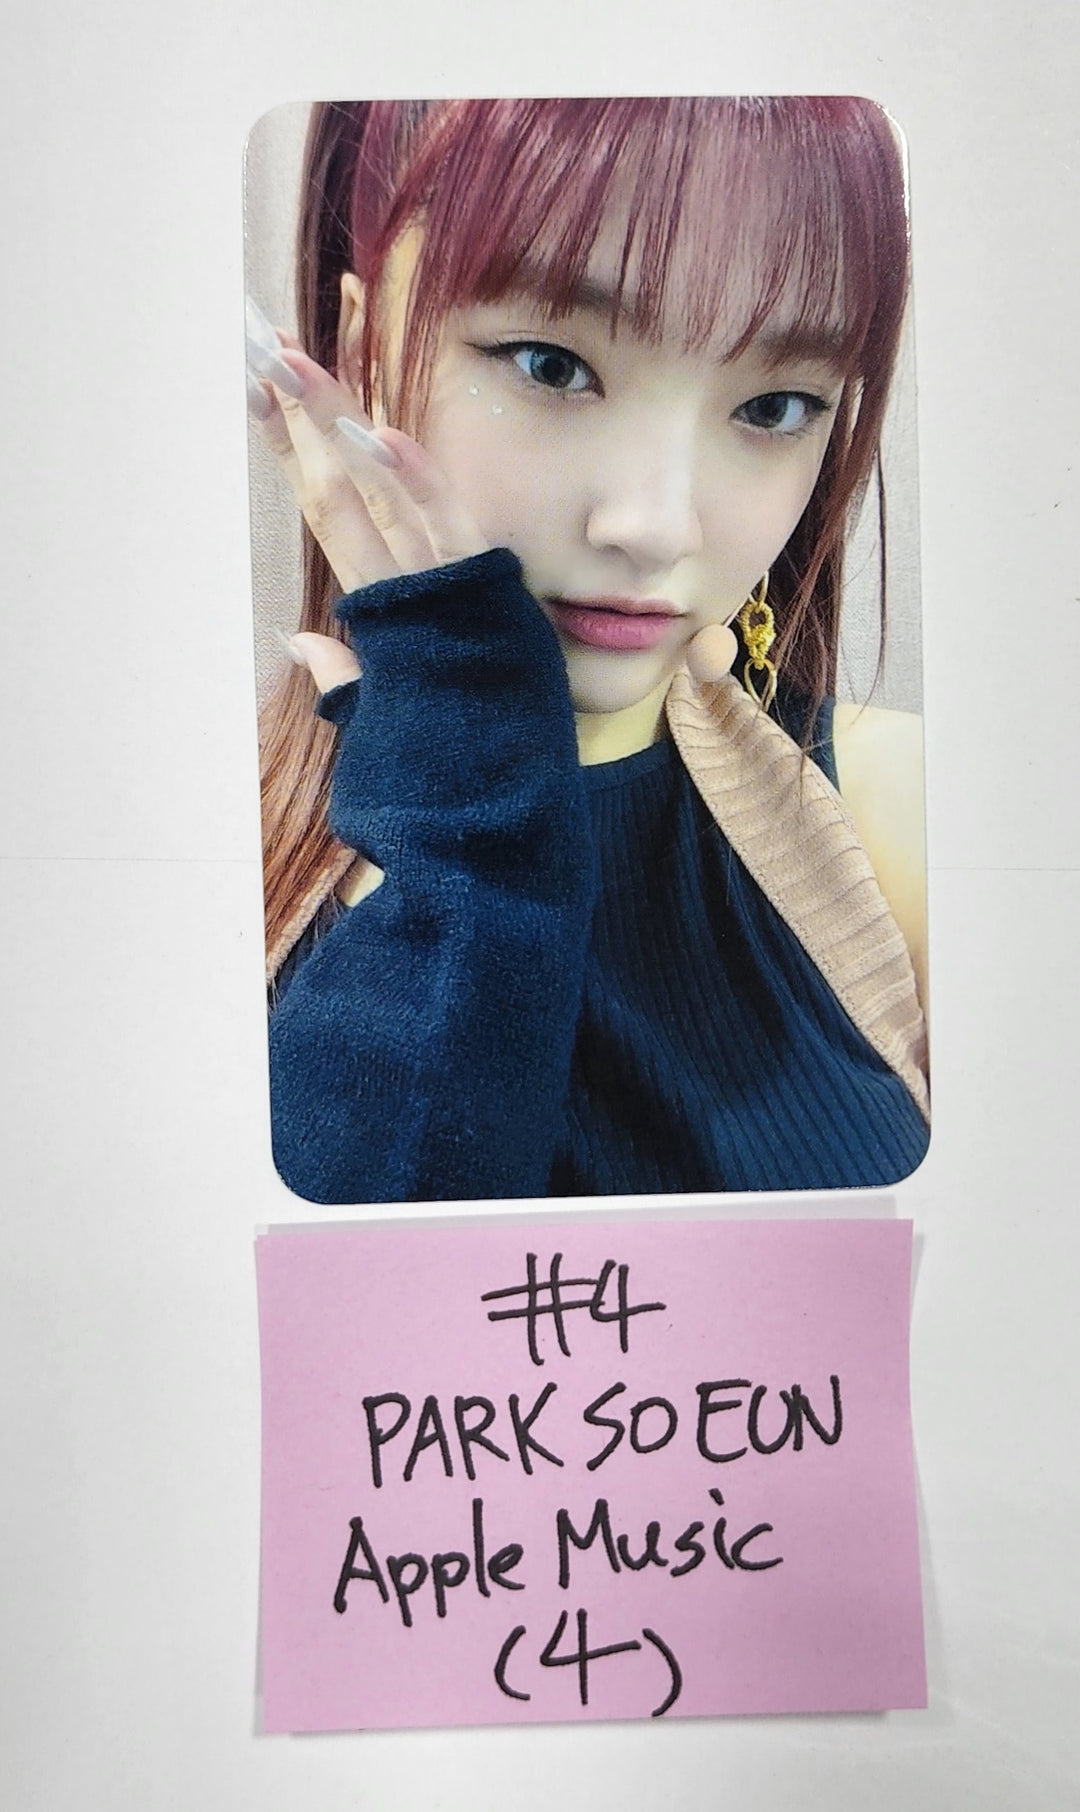 Weeekly "Play Game : AWAKE" - Apple Music Fansign Event Photocard Round 4